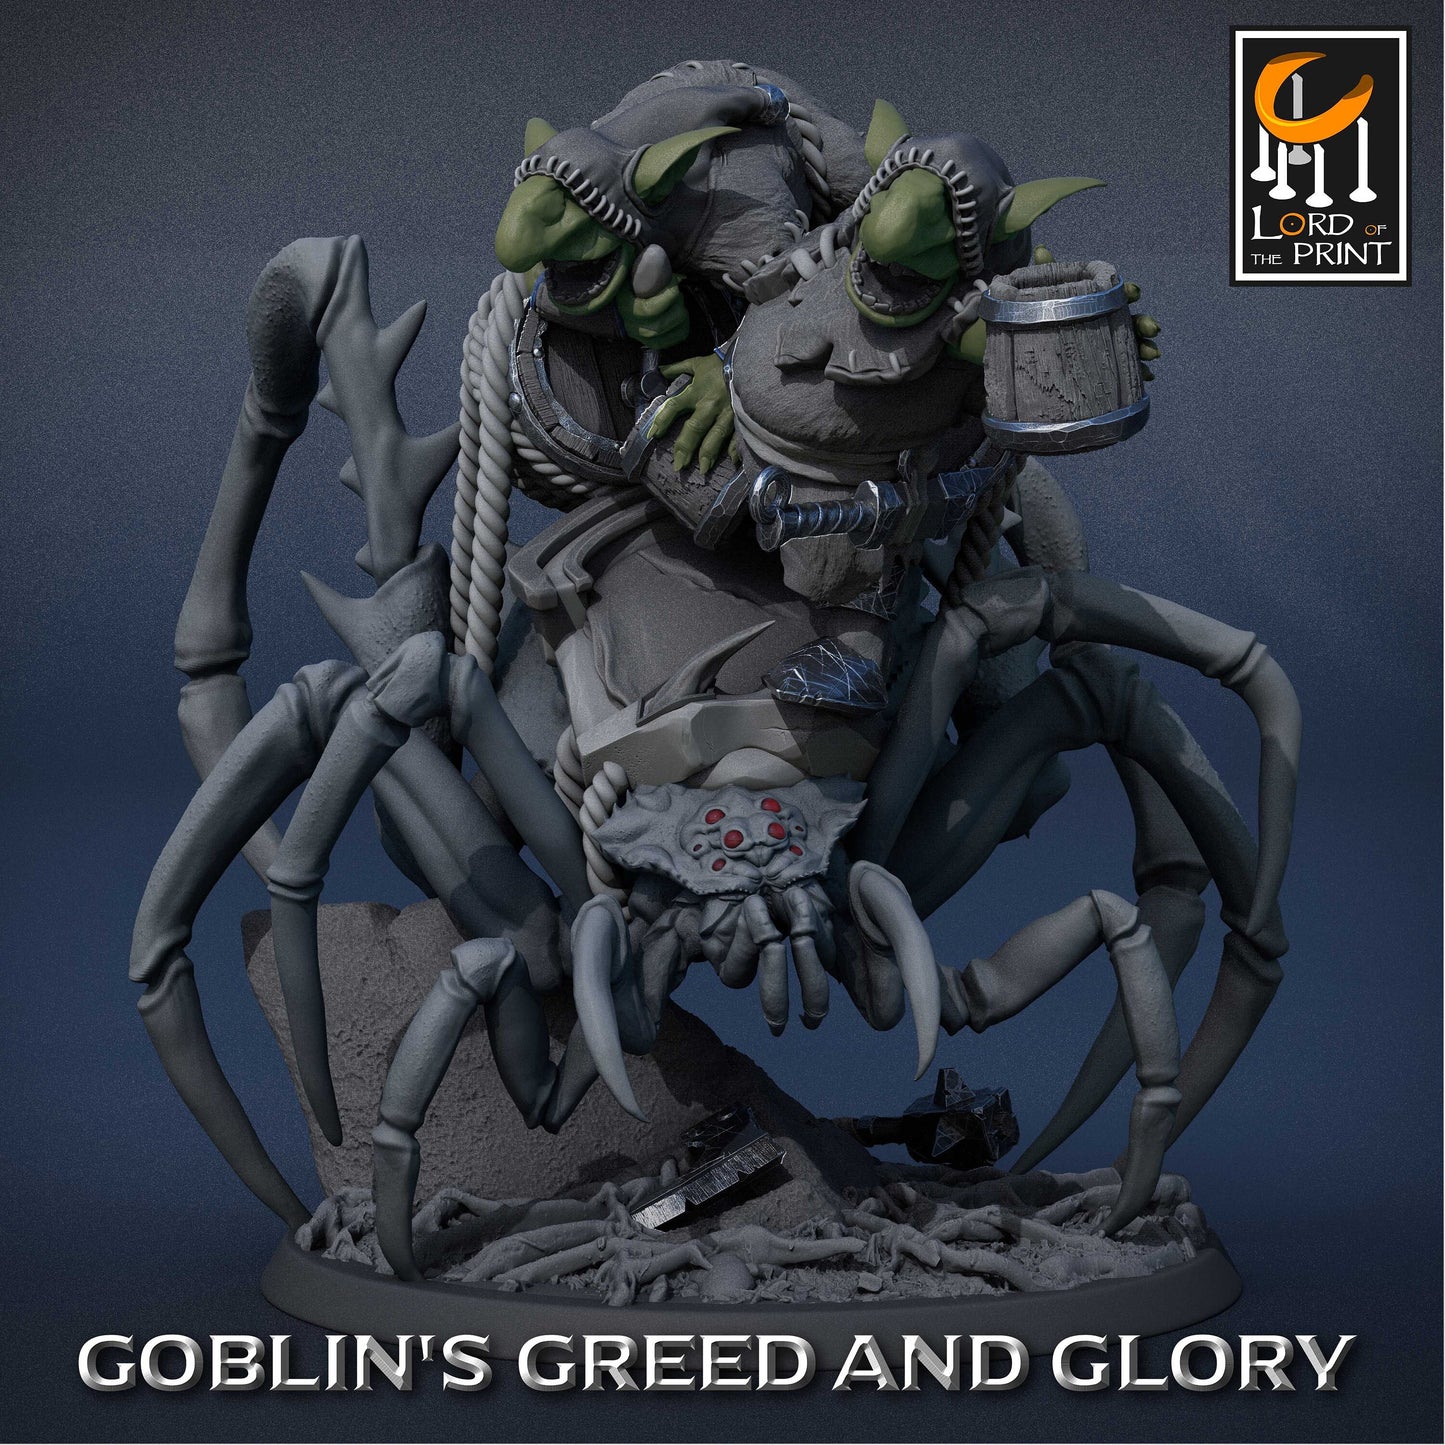 Goblin Spider Riders B | RPG Miniature for Dungeons and Dragons|Pathfinder|Tabletop Wargaming | Goblin Miniature | Lord of the Print